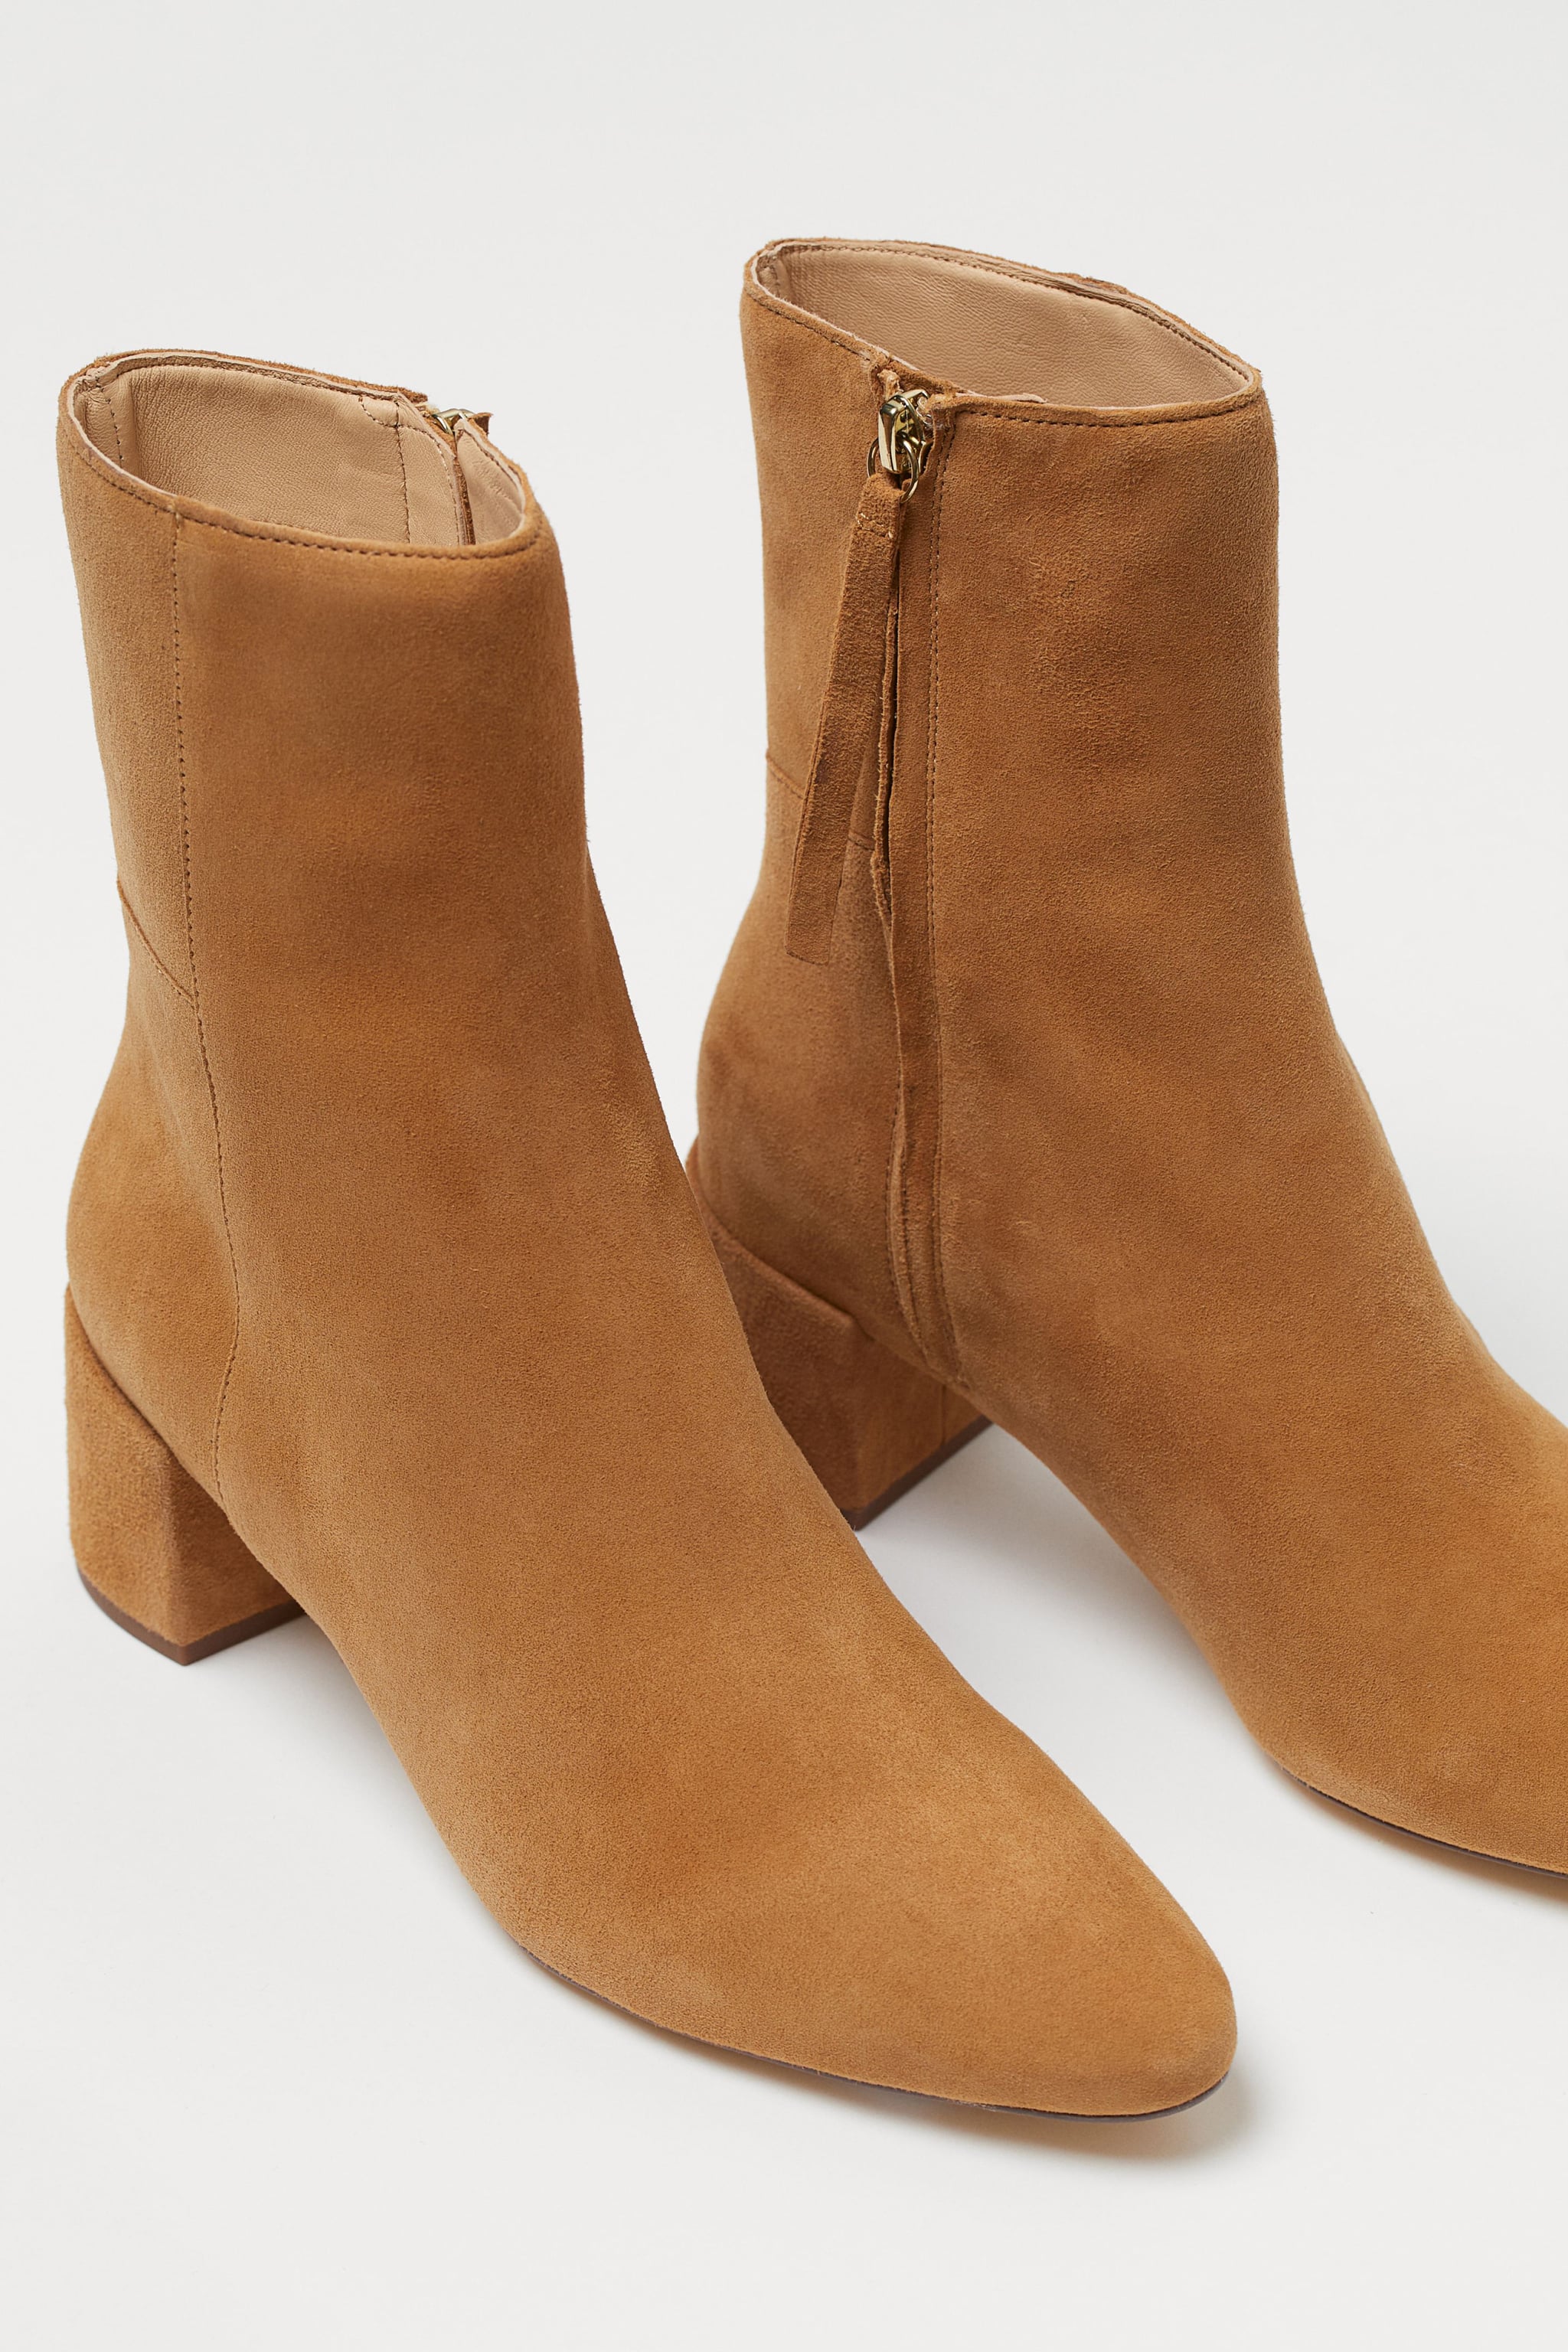 h&m suede ankle boots